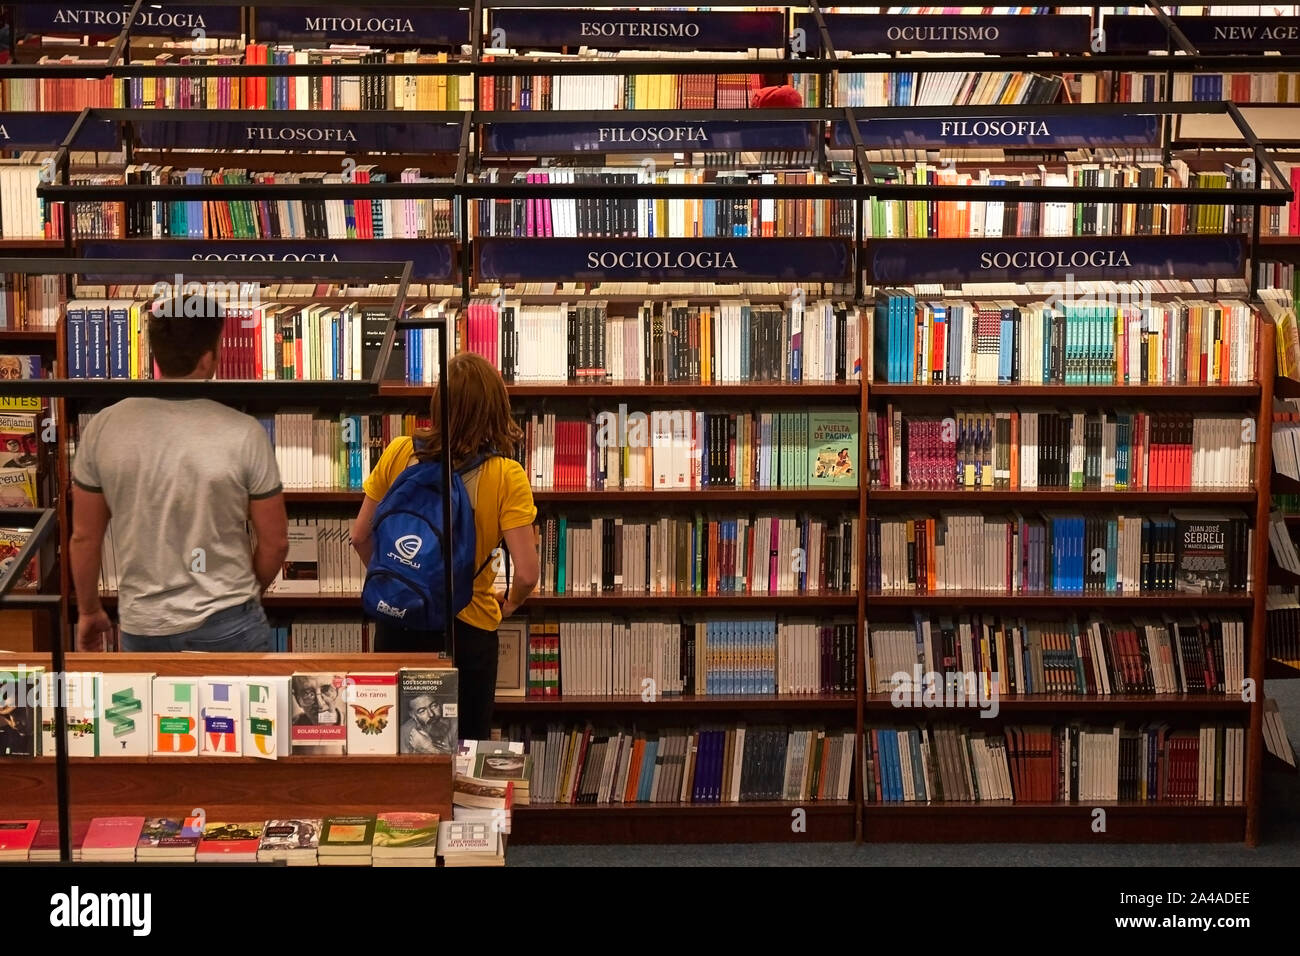 Customers looking for books inside the Ateneo Grand Splendid bookstore, Recoleta, Buenos Aires, Argentina. Stock Photo